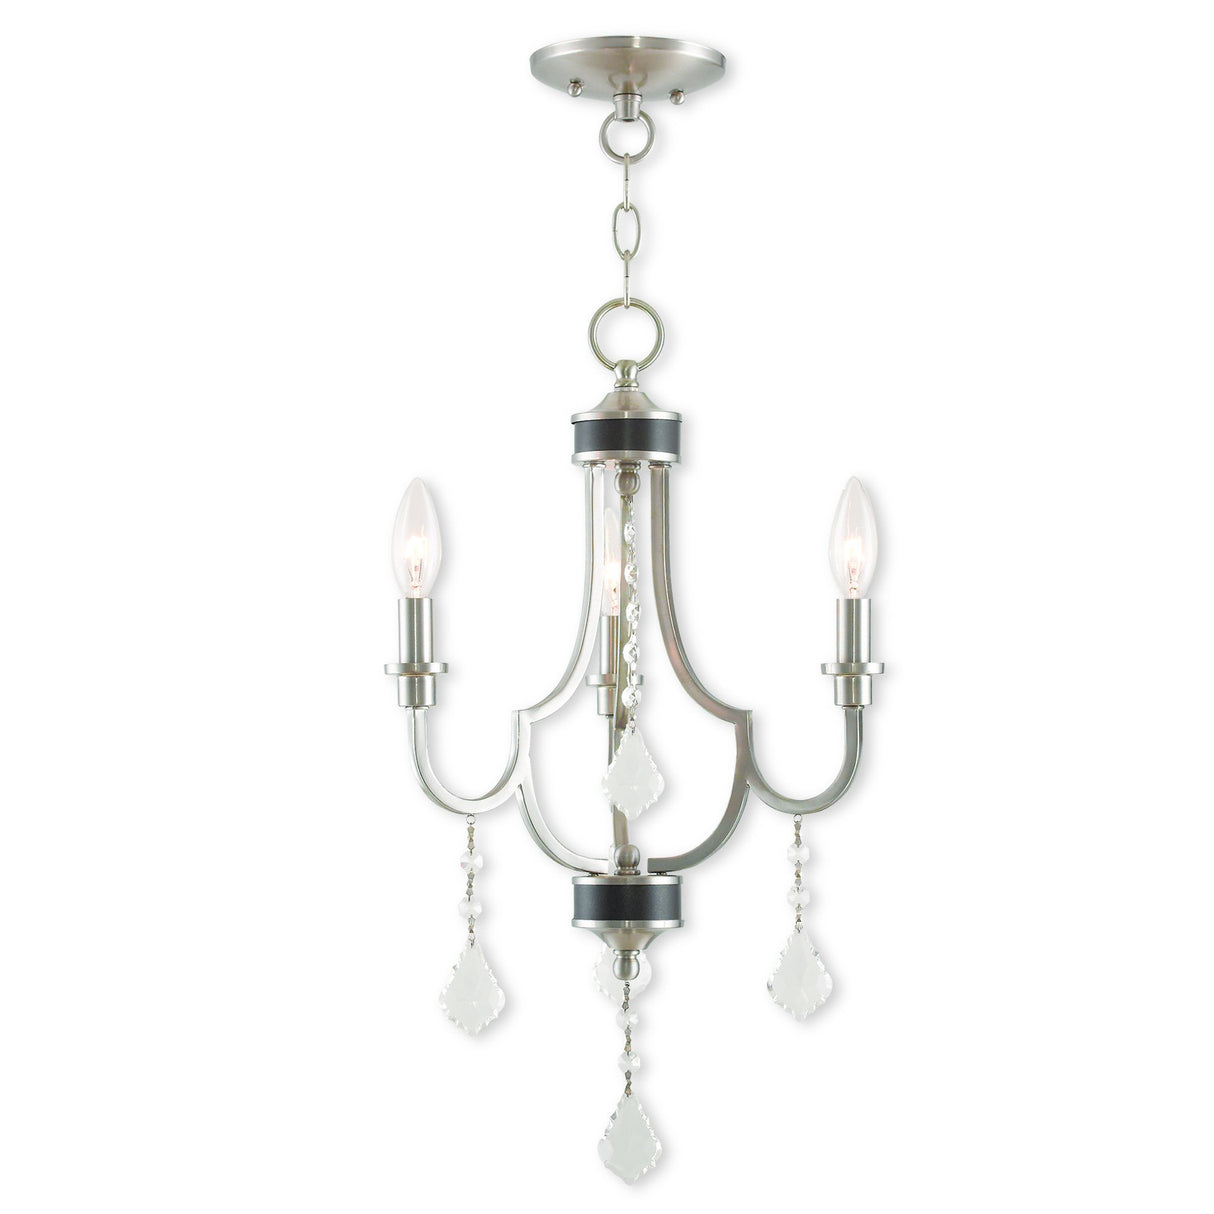 Livex Lighting 40883-91 Transitional Three Light Mini Chandelier from Glendale Collection in Pwt, Nckl, B/S, Slvr. Finish, Brushed Nickel